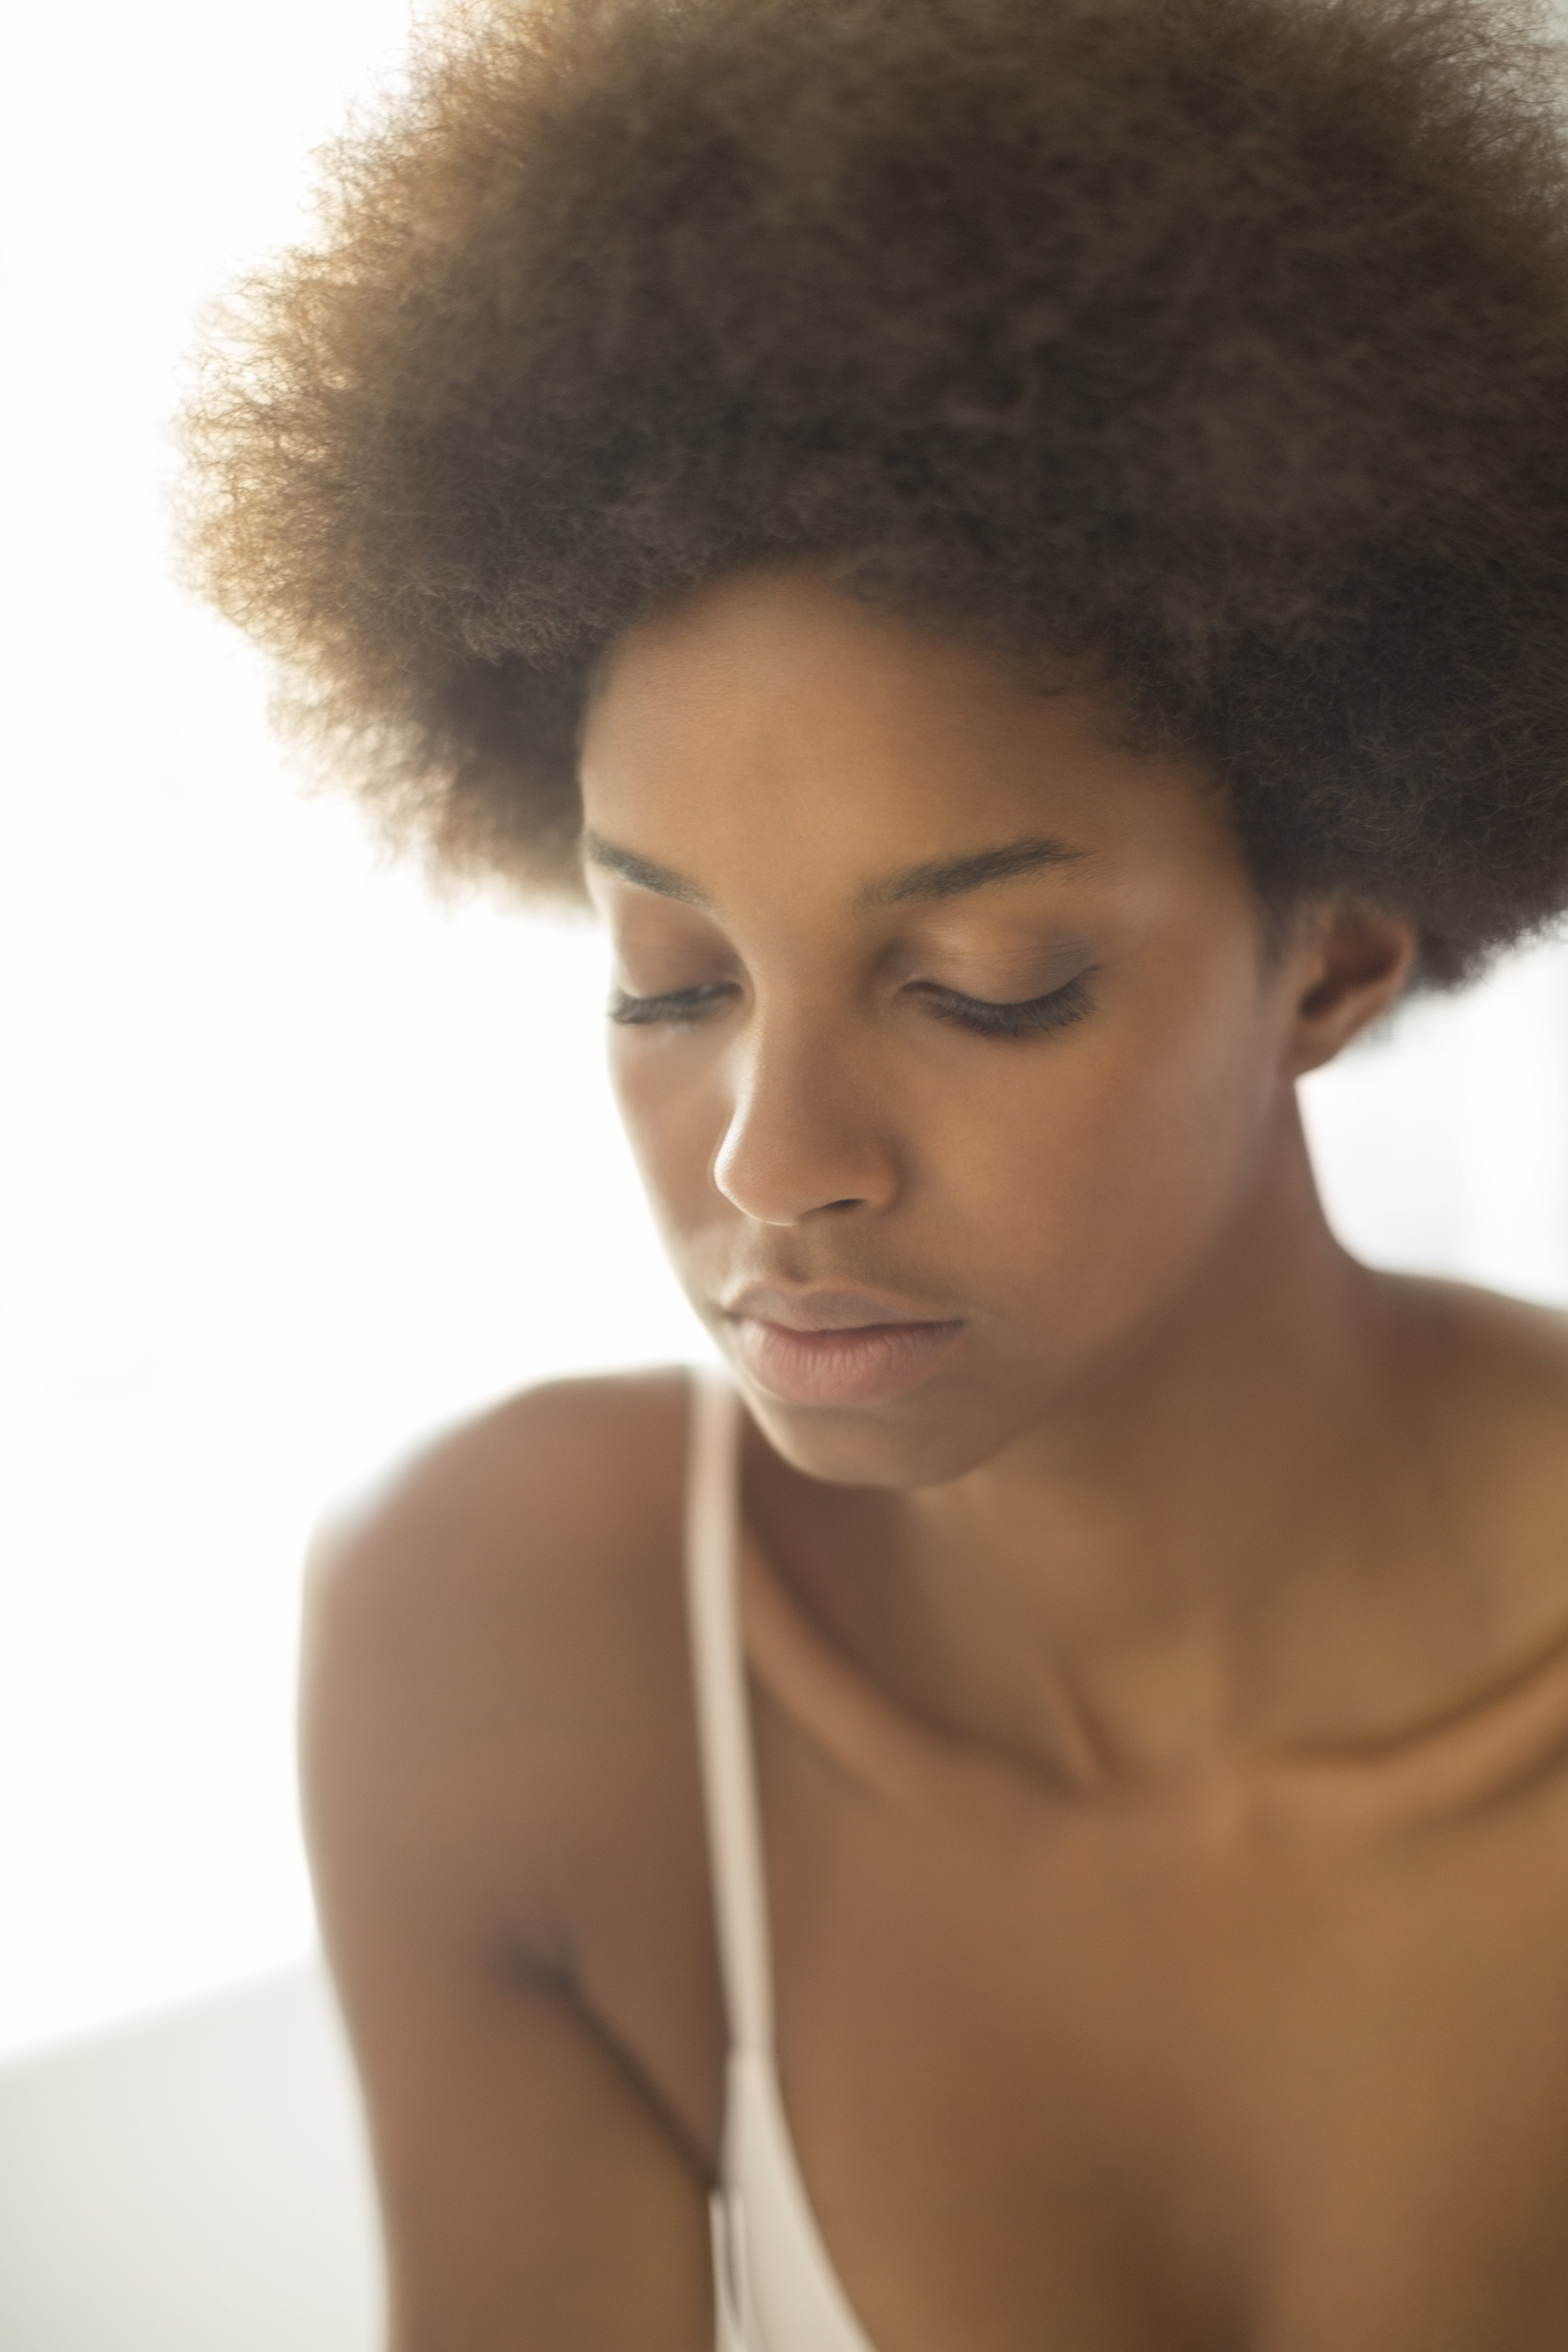 The Spirituality Of Overcoming: How This Simple Practice Will Help Us Heal From Black Trauma